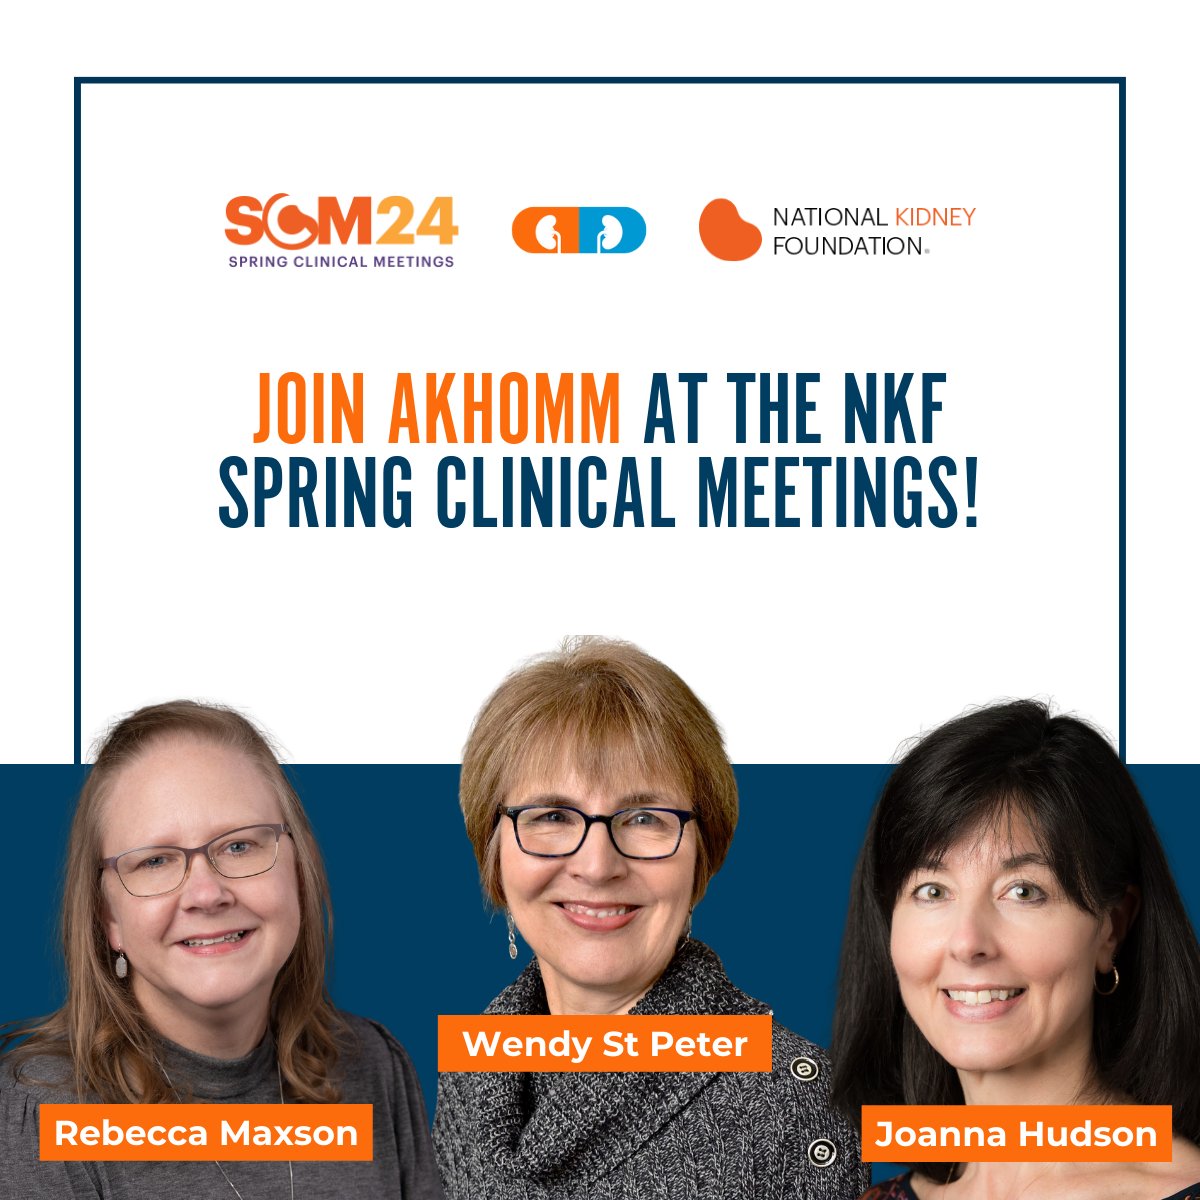 We’re thrilled to announce that several AKHOMM leaders will be participating in this year’s National Kidney Foundation Spring Clinical Meeting! Join us as they share insights into their work and the mission of AKHOMM. We hope to see you there! #NKF #TwitteRX #NephTwitter